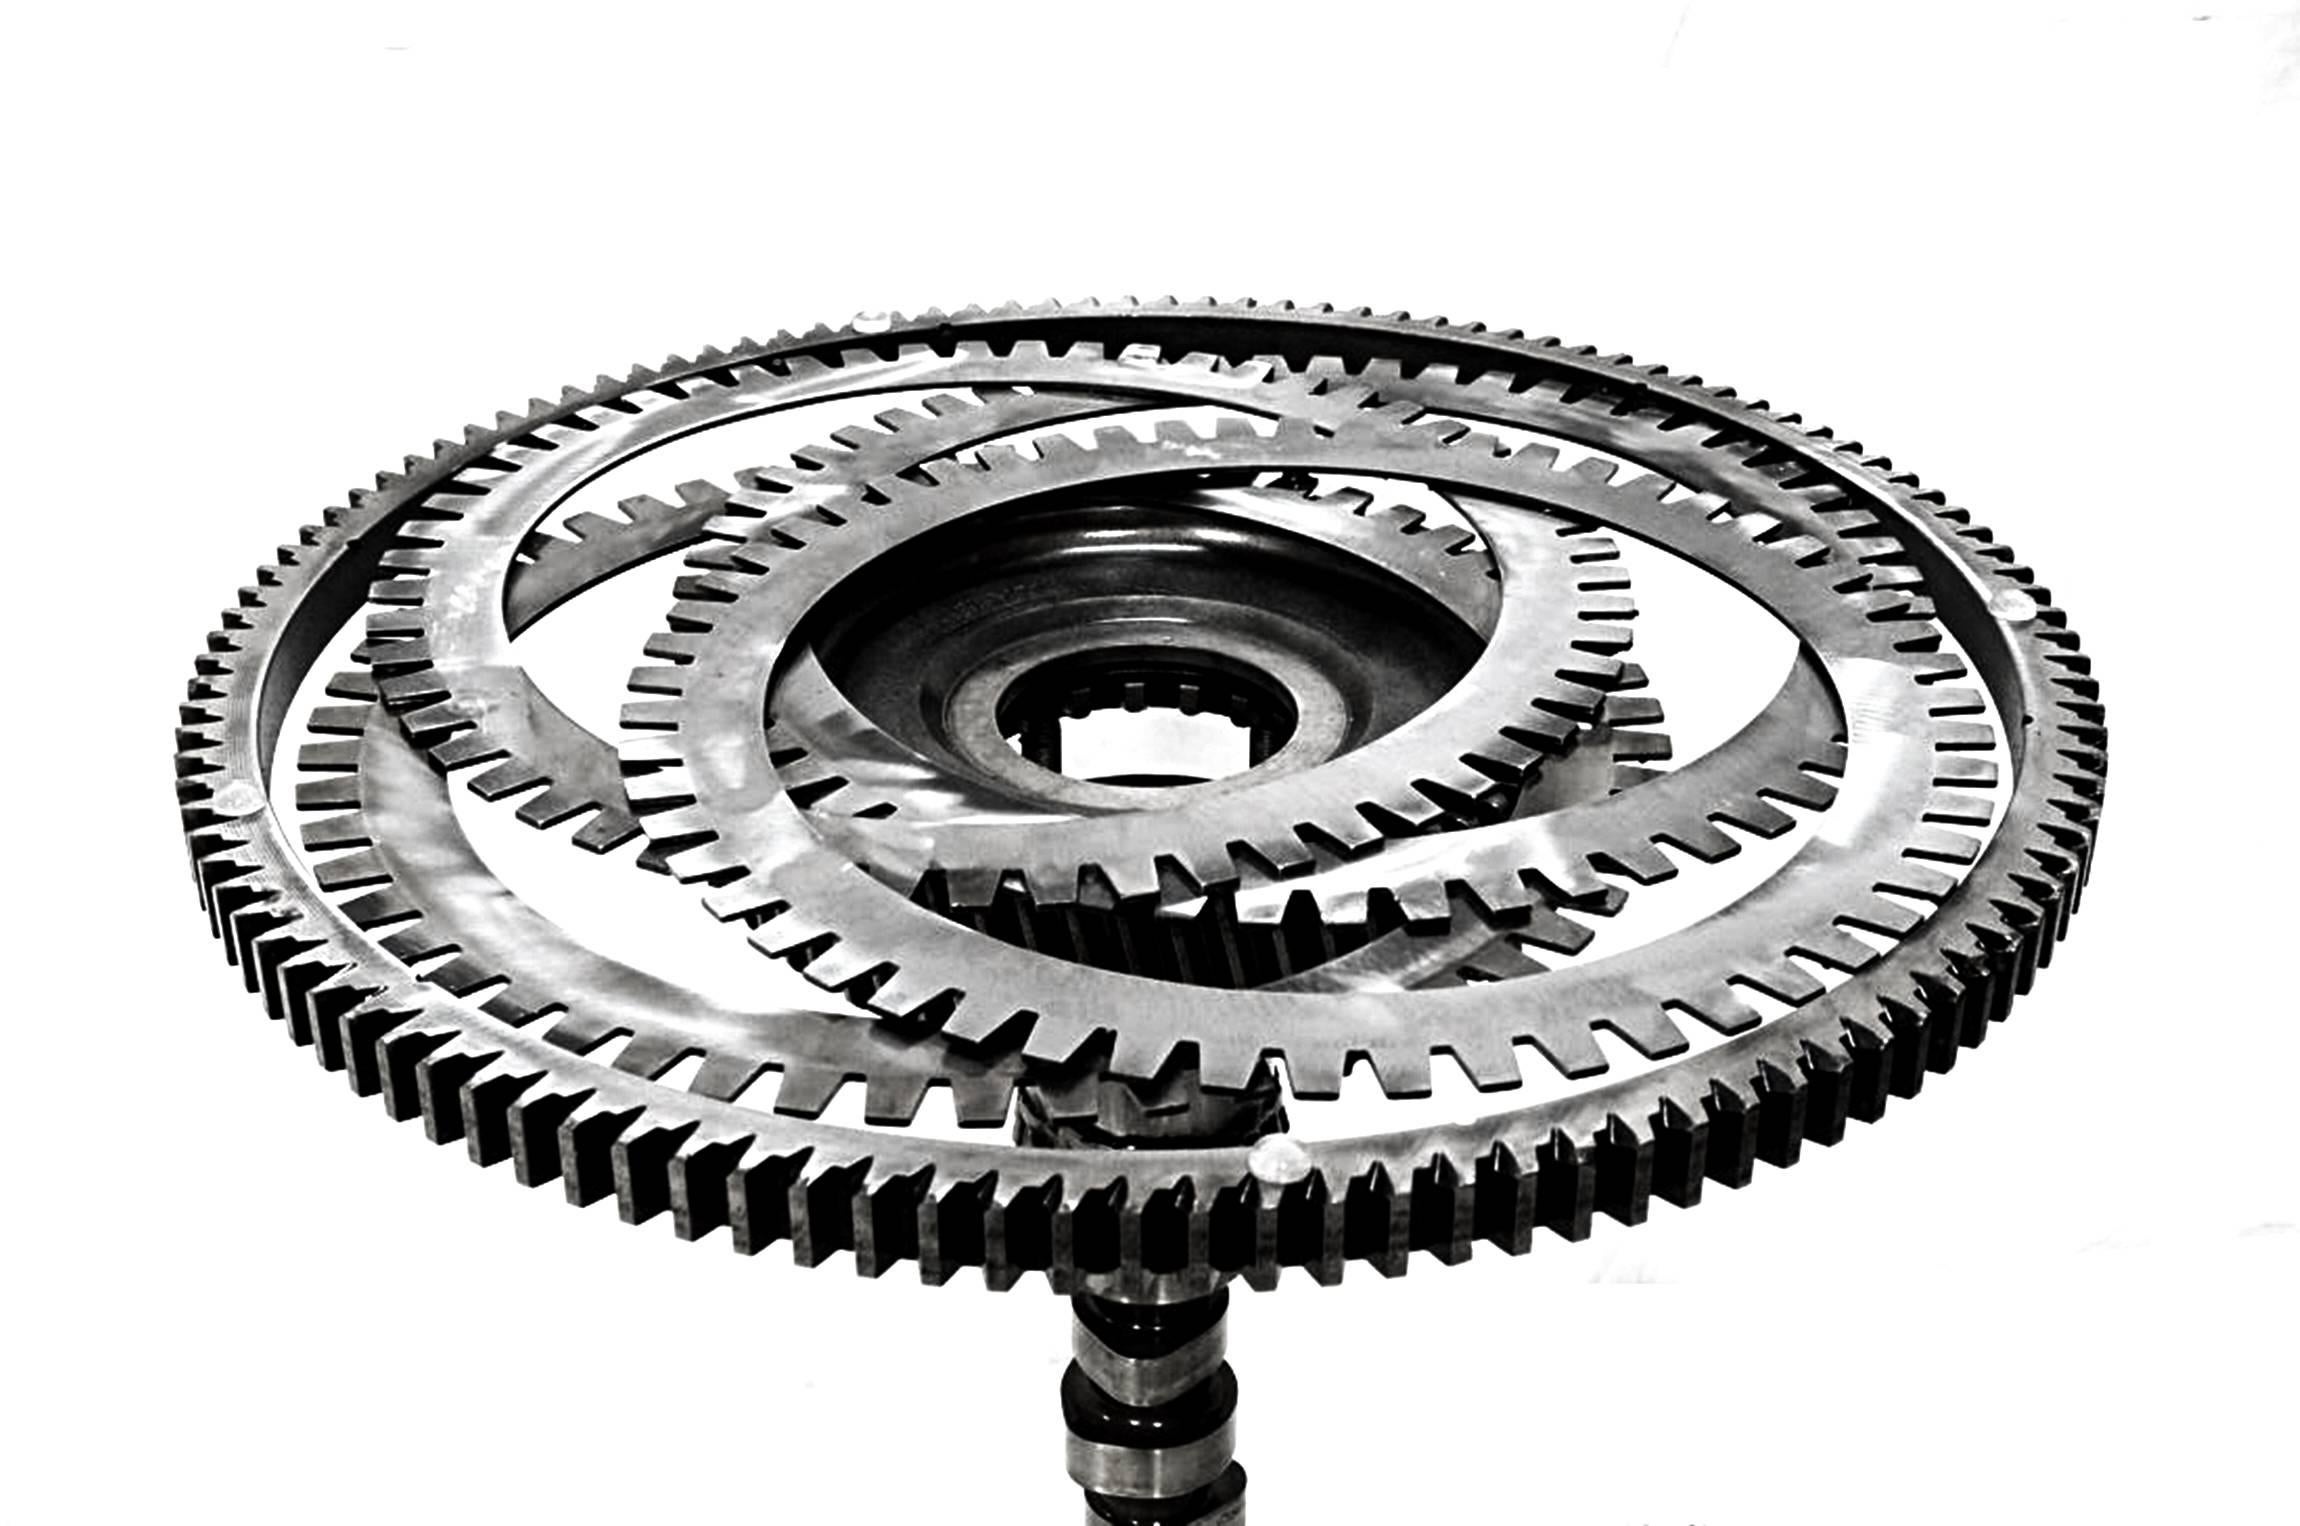 Stunning center table designed and manufactured by Mexican sculptor Feliciano Bejar.
The table is made out of steel and gears from machinery that Bejar re-imagined into a sculptural table.

The piece is in excellent condition and ready to be